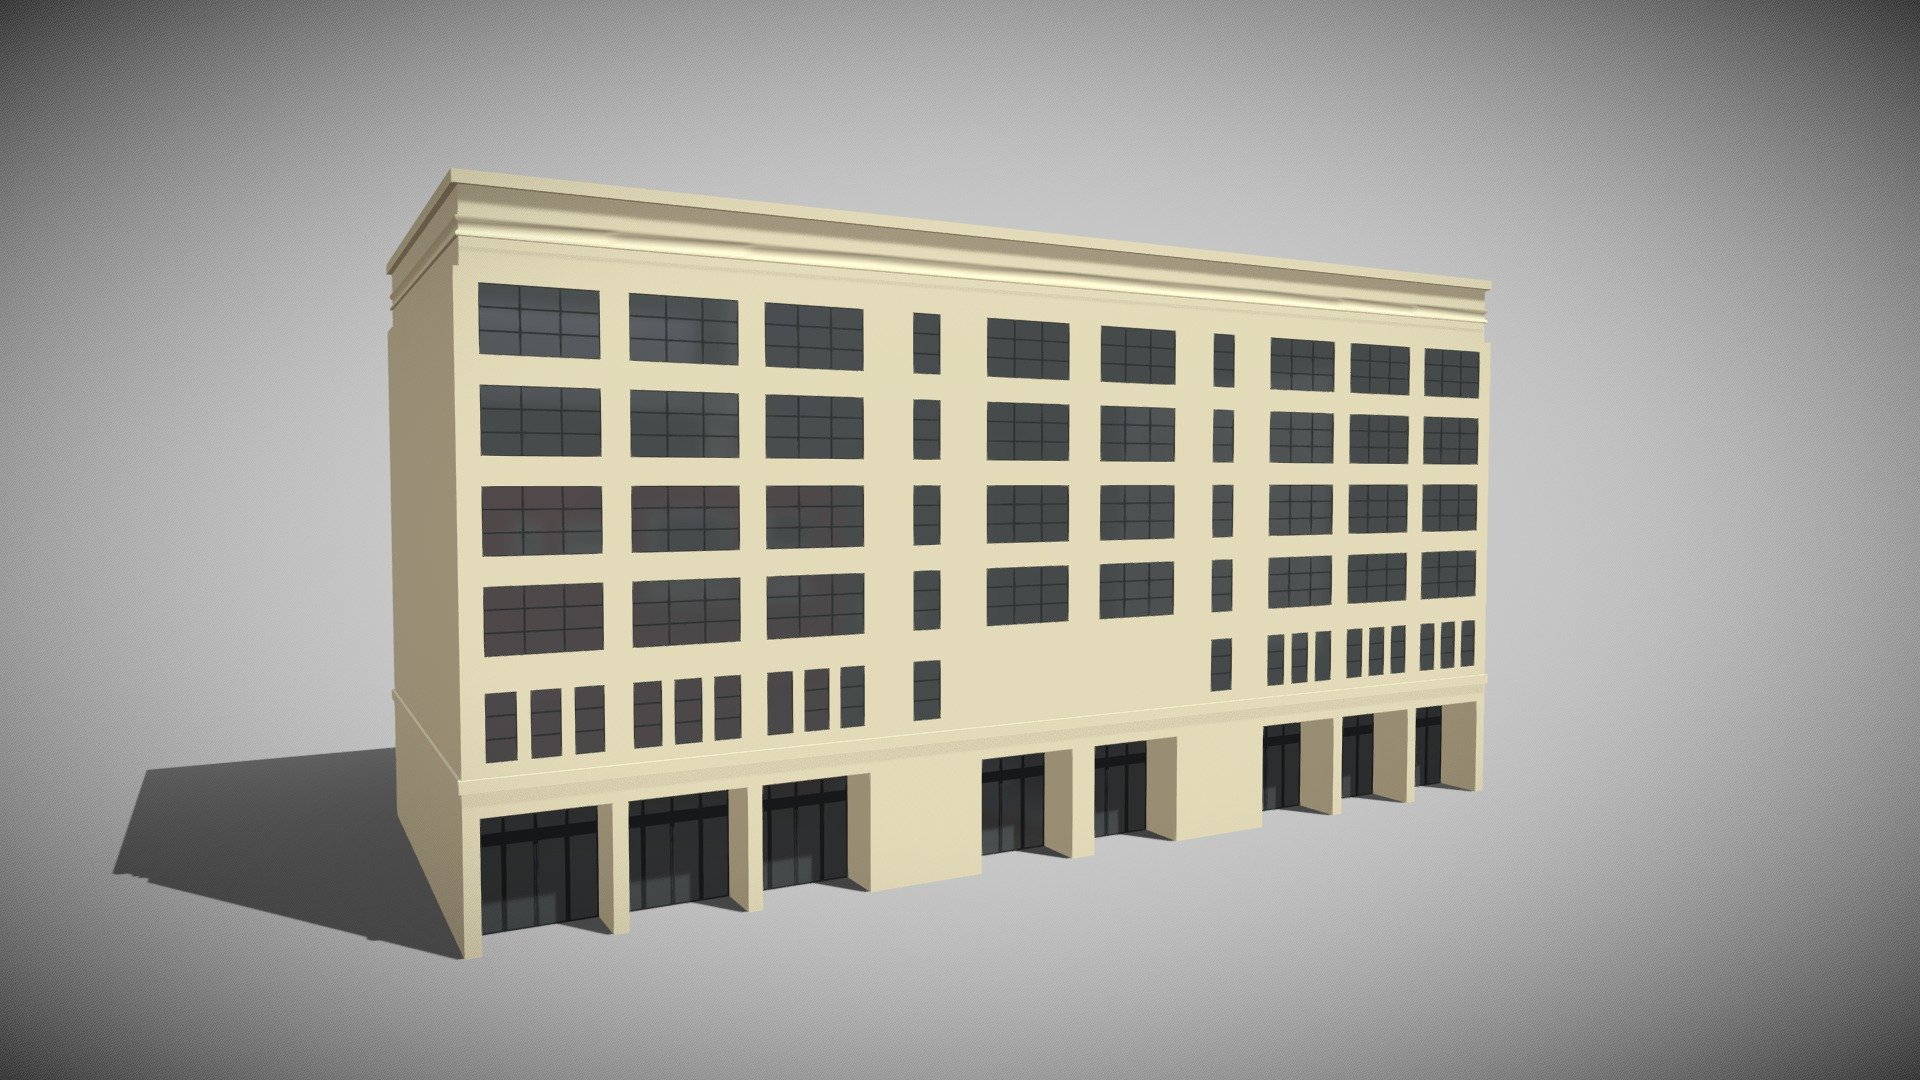 Detailed model of a Commercial Building with no interior, modeled in Cinema 4D.The model was created using approximate real world dimensions.

The model has 14,945 polys and 17,256 vertices.

An additional file has been provided containing the original Cinema 4D project files and other 3d export files such as 3ds, fbx and obj 3d model